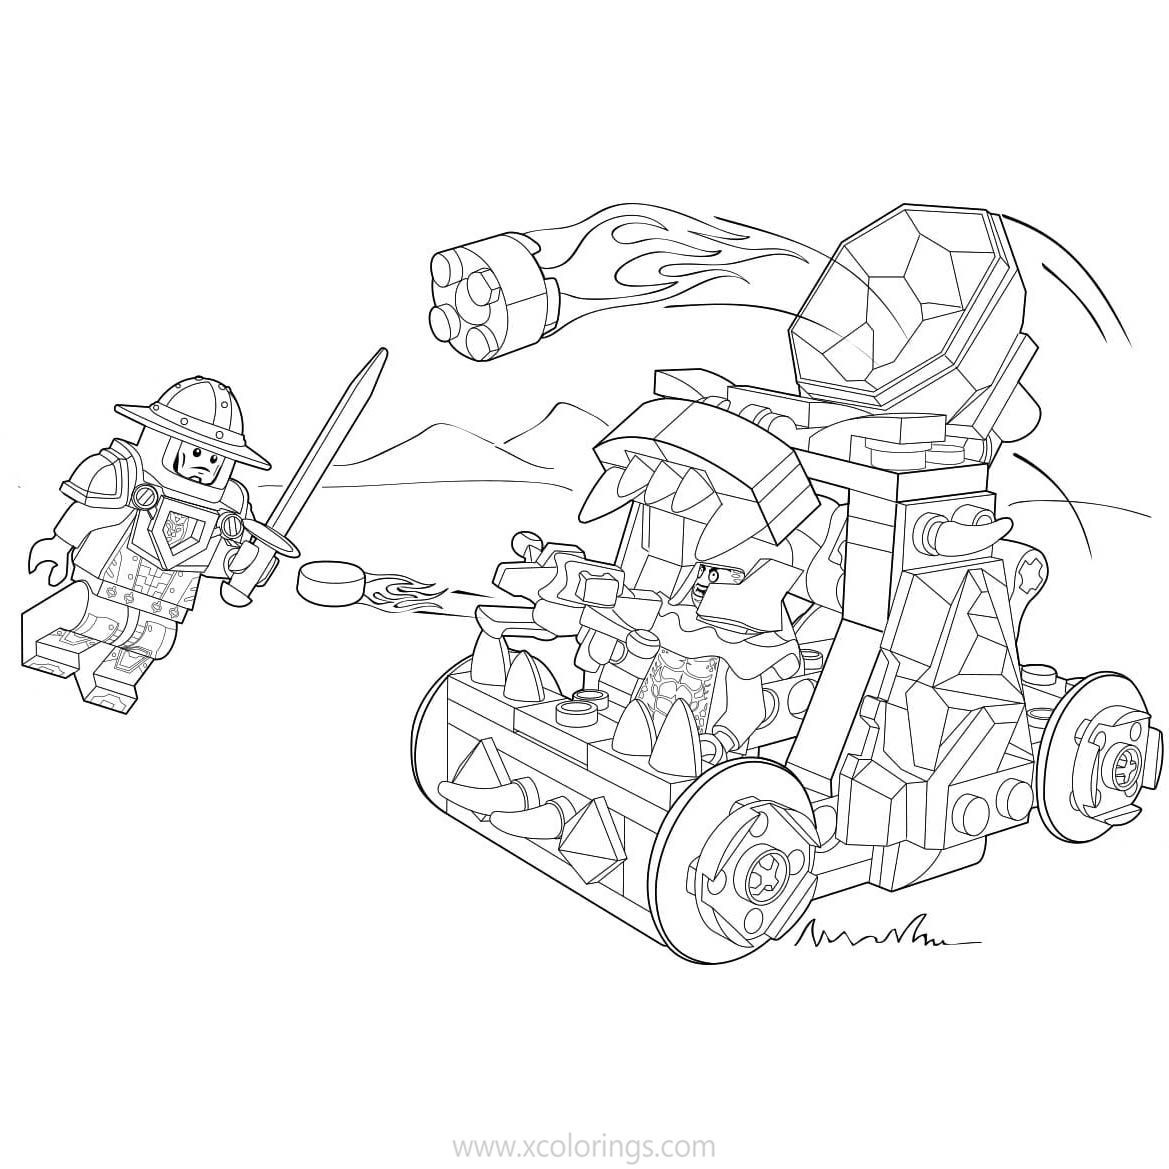 Free LEGO NEXO Knights Coloring Pages Soldier is Fighting printable